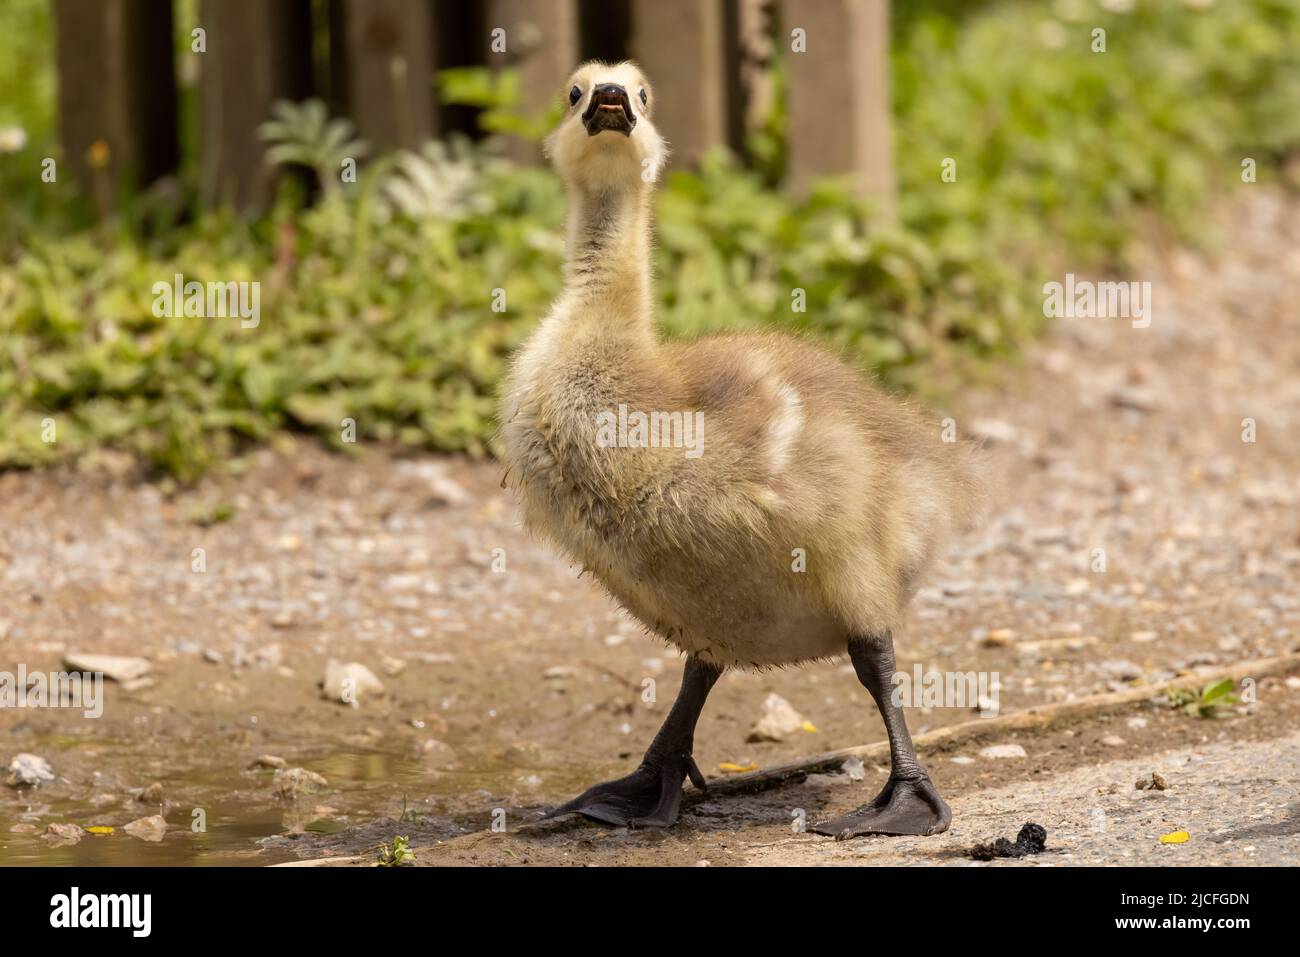 Goslings with the unusual mixed parentage of Canada Goose and Greylag Goose at WWT Arundel Wetland Centre, Arundel, West Sussex, UK, a nature reserve Stock Photo